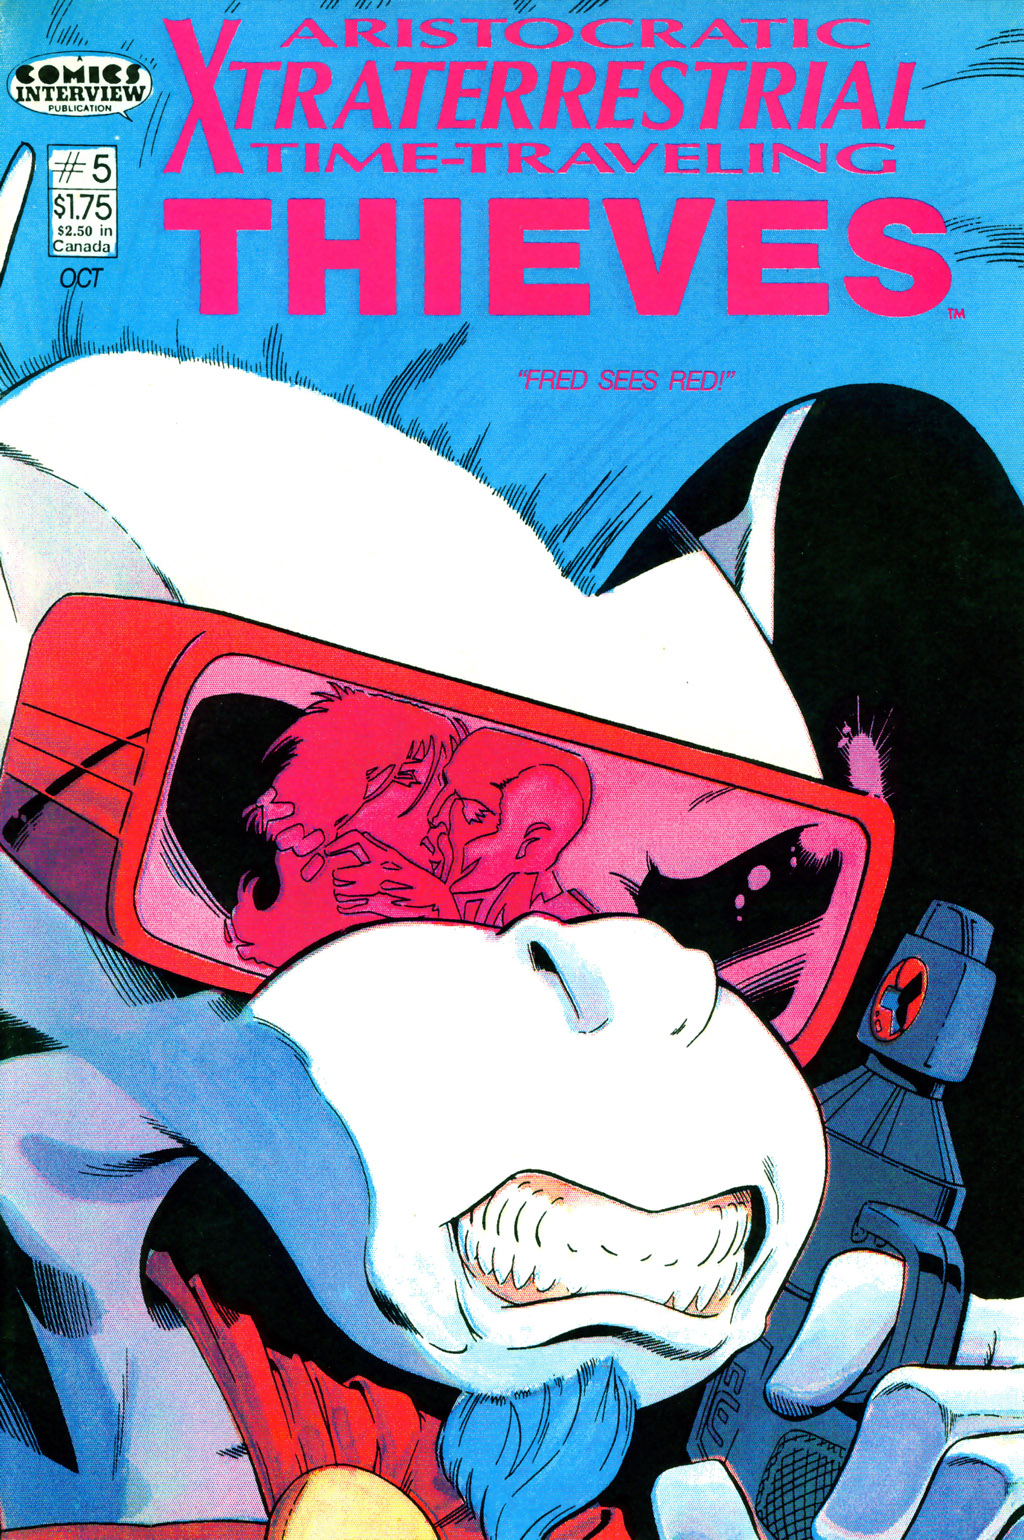 Read online Aristocratic Xtraterrestrial Time-Traveling Thieves comic -  Issue #5 - 1